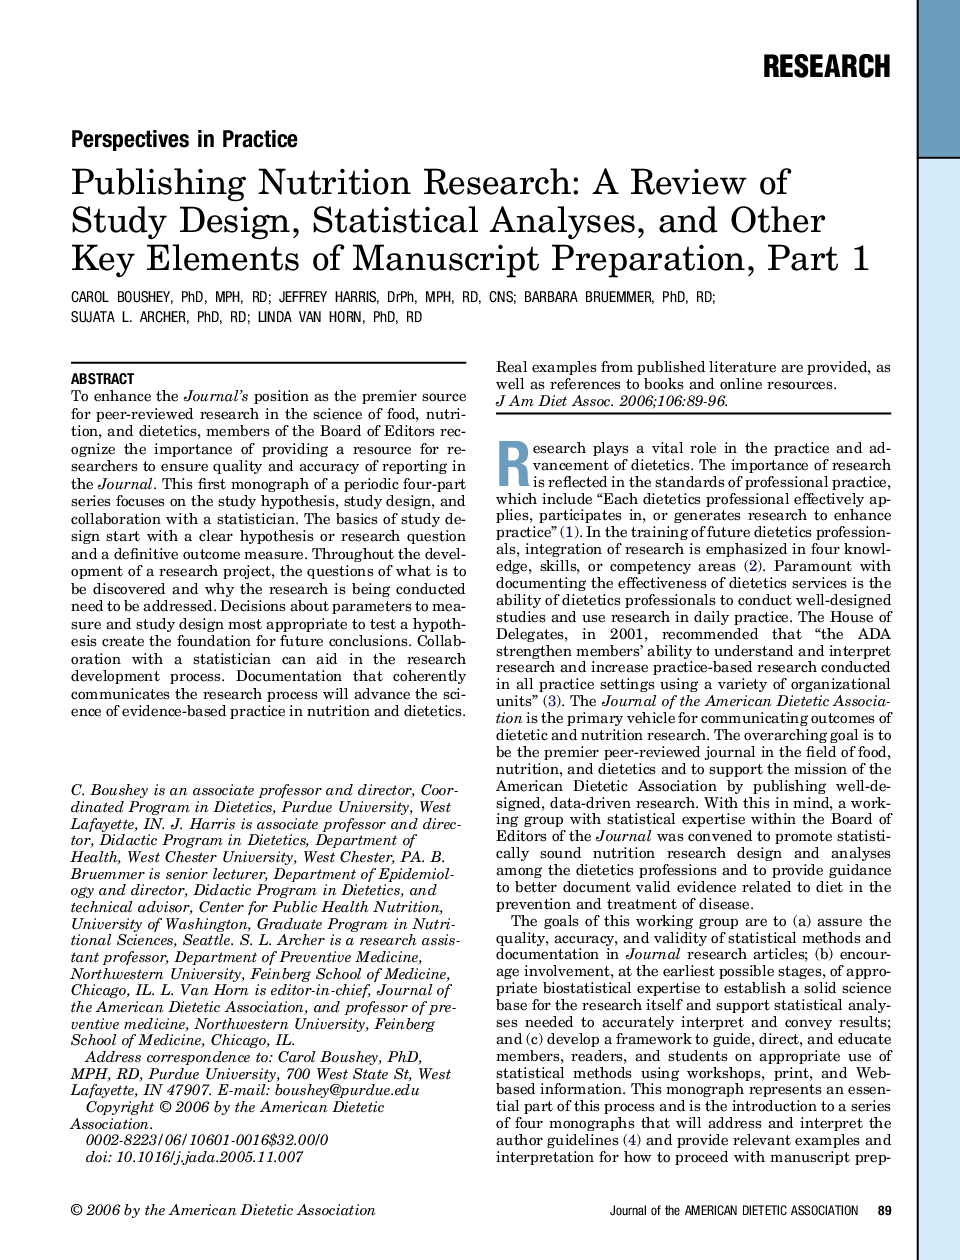 Publishing Nutrition Research: A Review of Study Design, Statistical Analyses, and Other Key Elements of Manuscript Preparation, Part 1